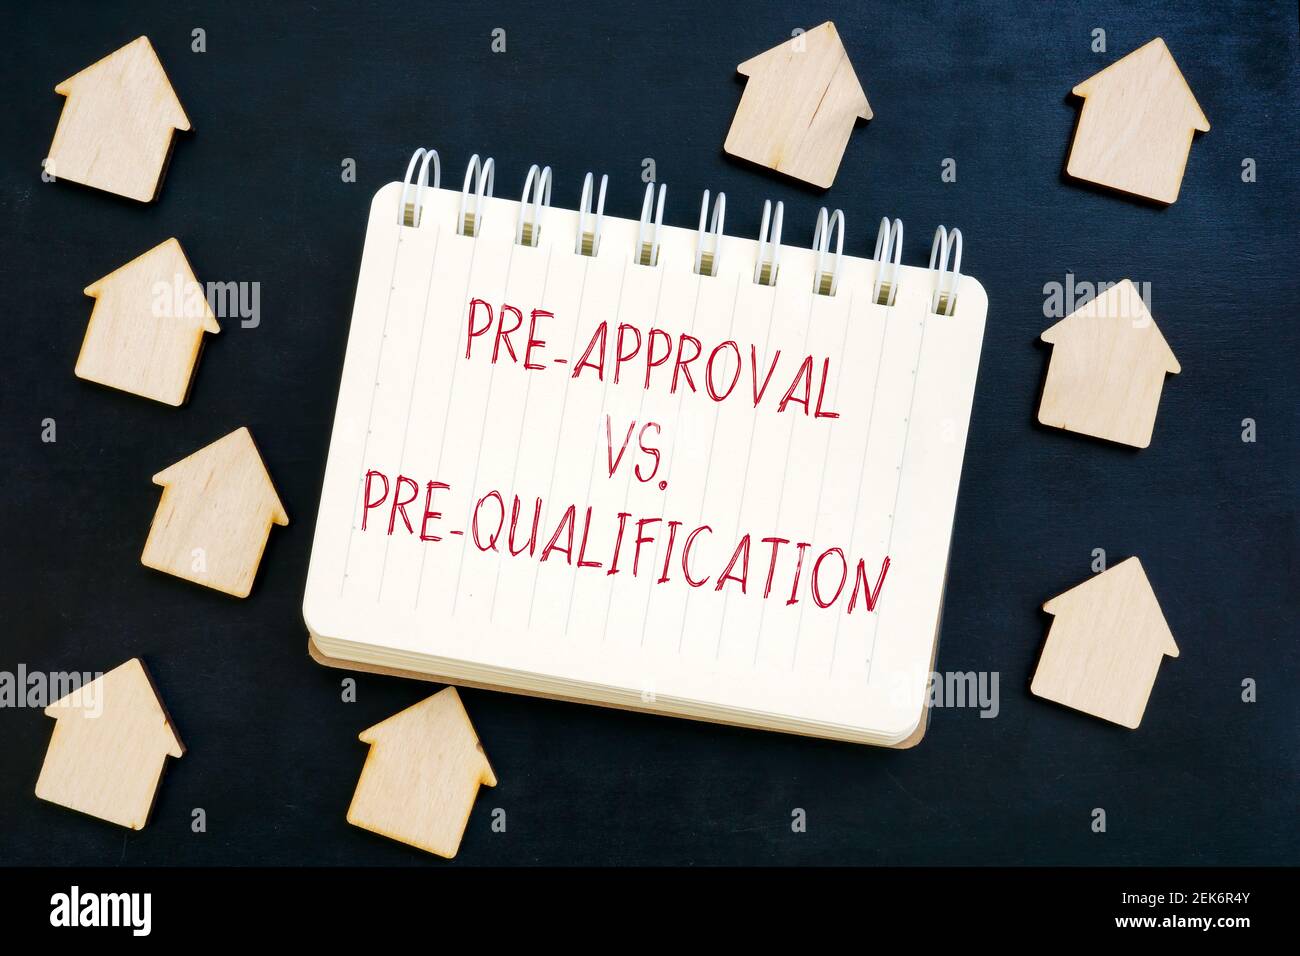 Pre-Approval vs Pre-Qualification mortgage words and small homes. Stock Photo